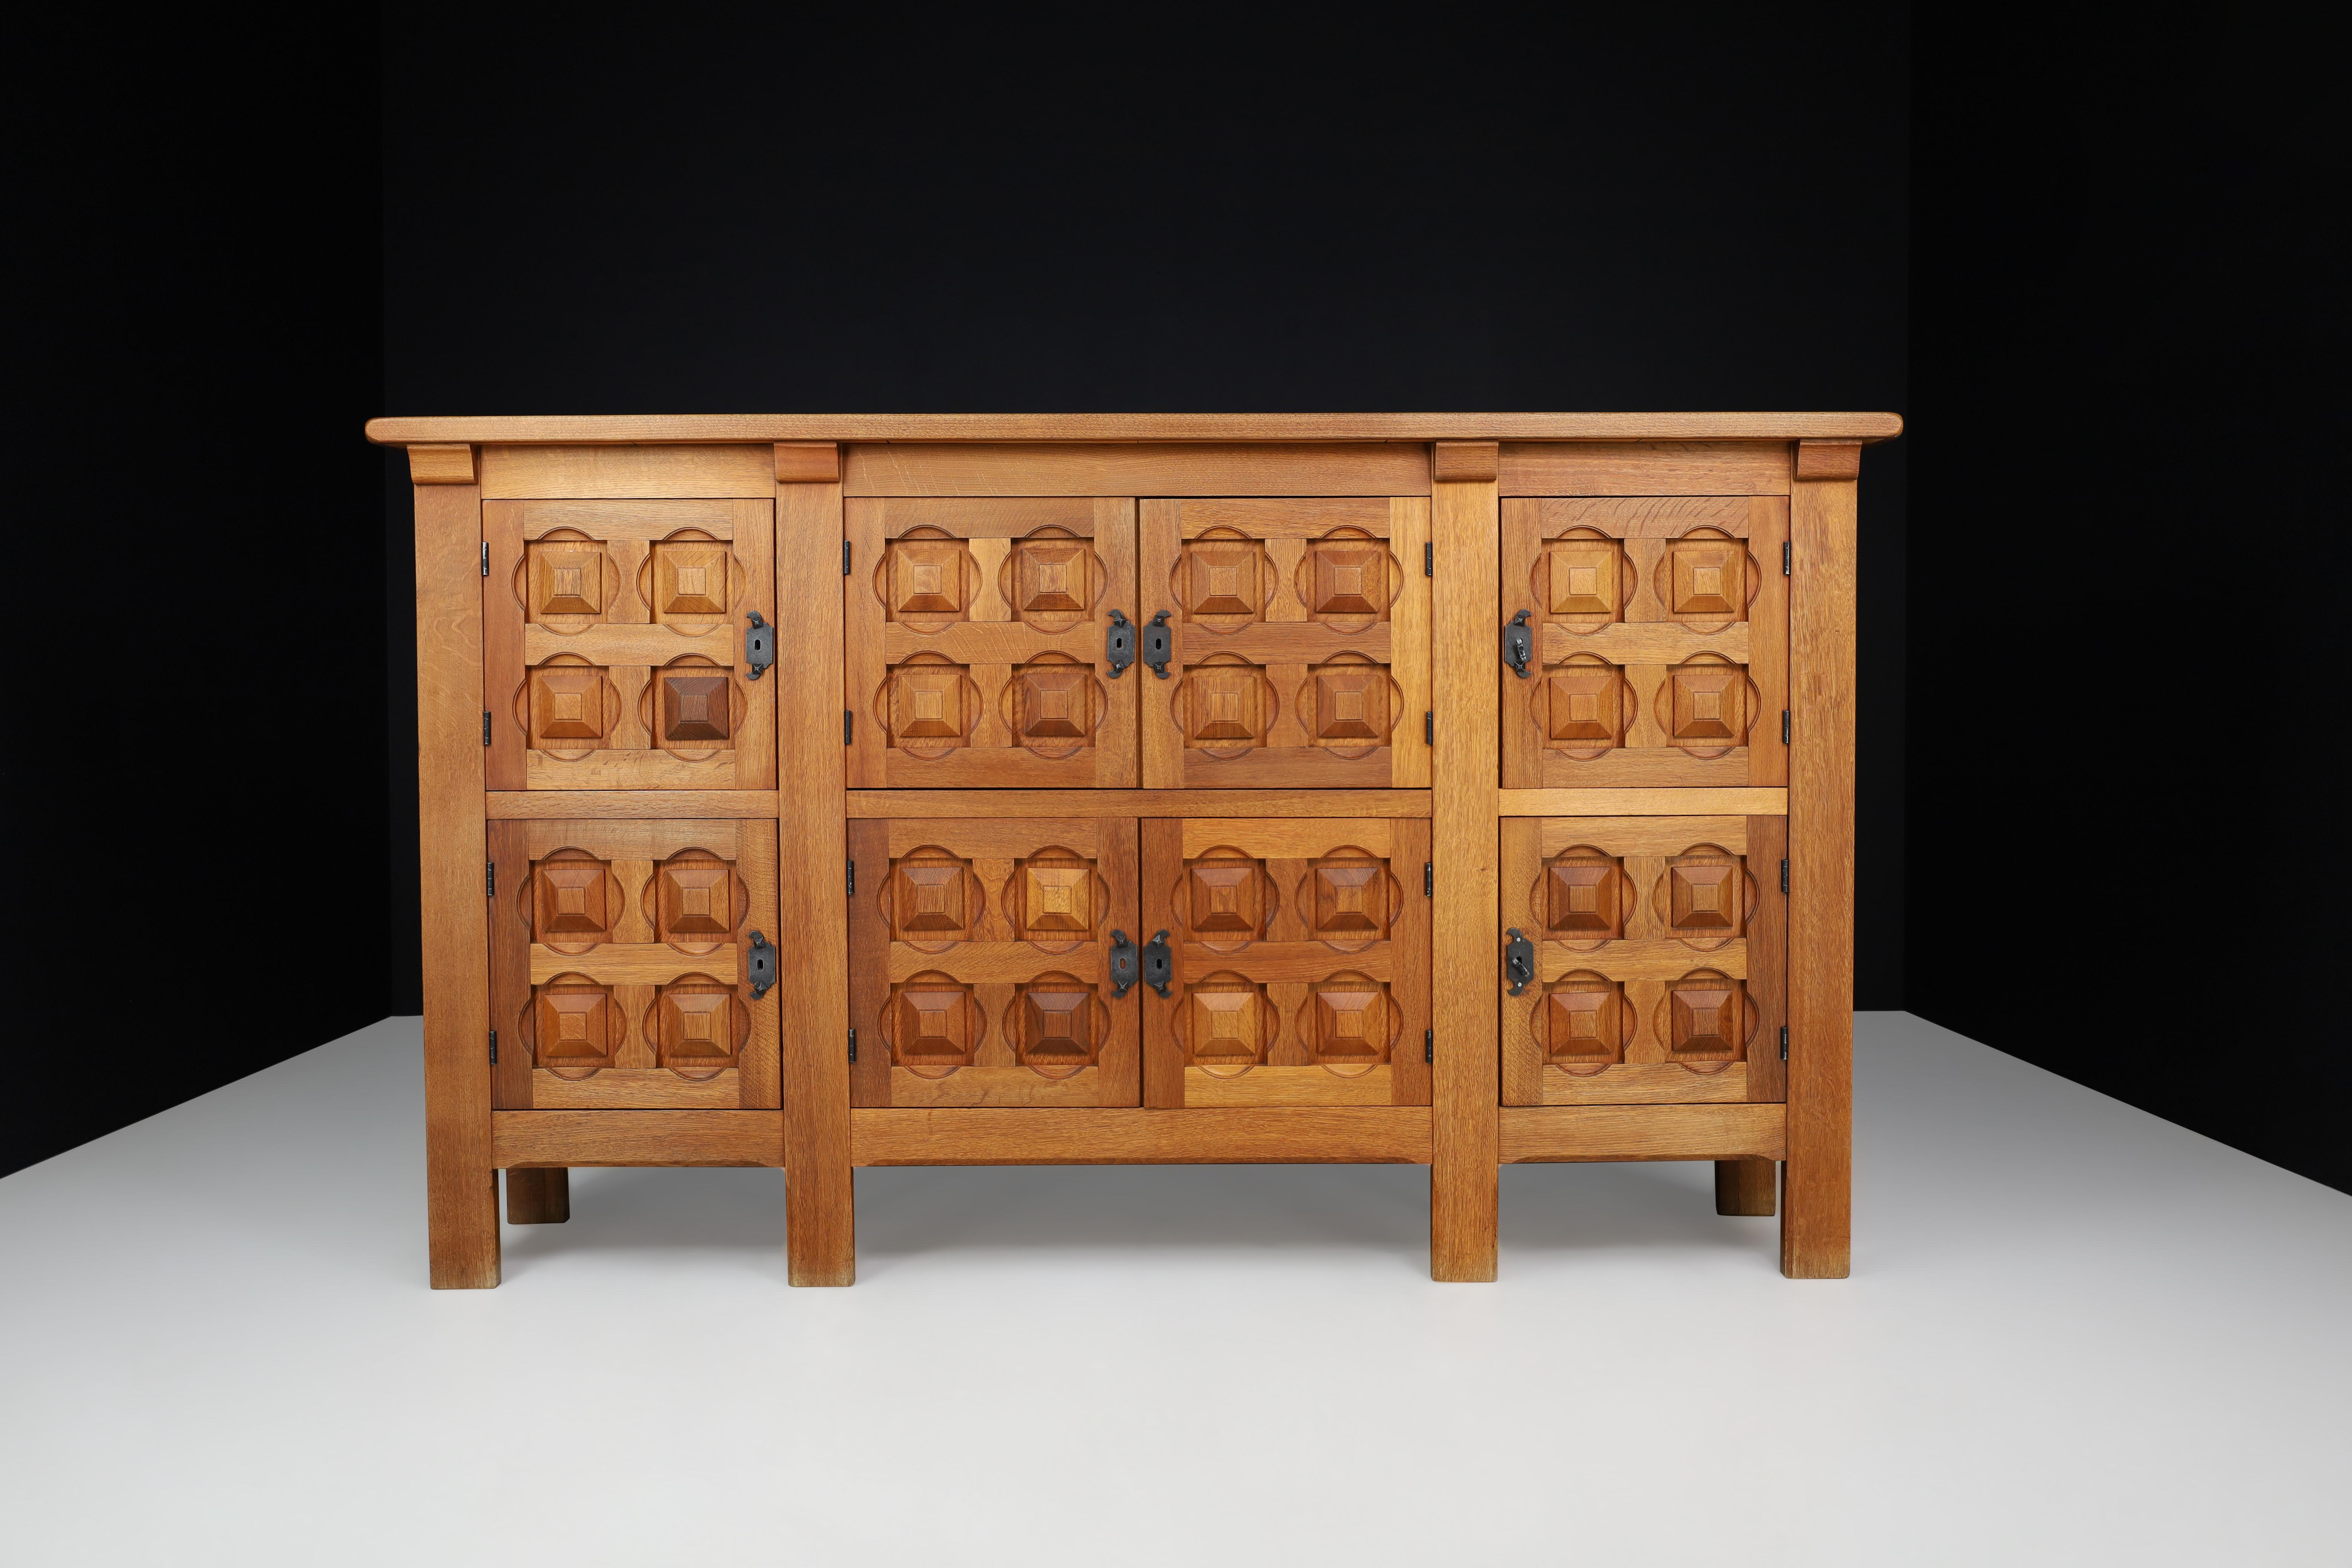 Handcrafted solid oak Credenza with wrought iron details Spain 1940s

This is a beautiful, handcrafted solid oak credenza or sideboard with wrought iron details from Spain in the 1940s. The piece has an asymmetrical structure with eight oak door